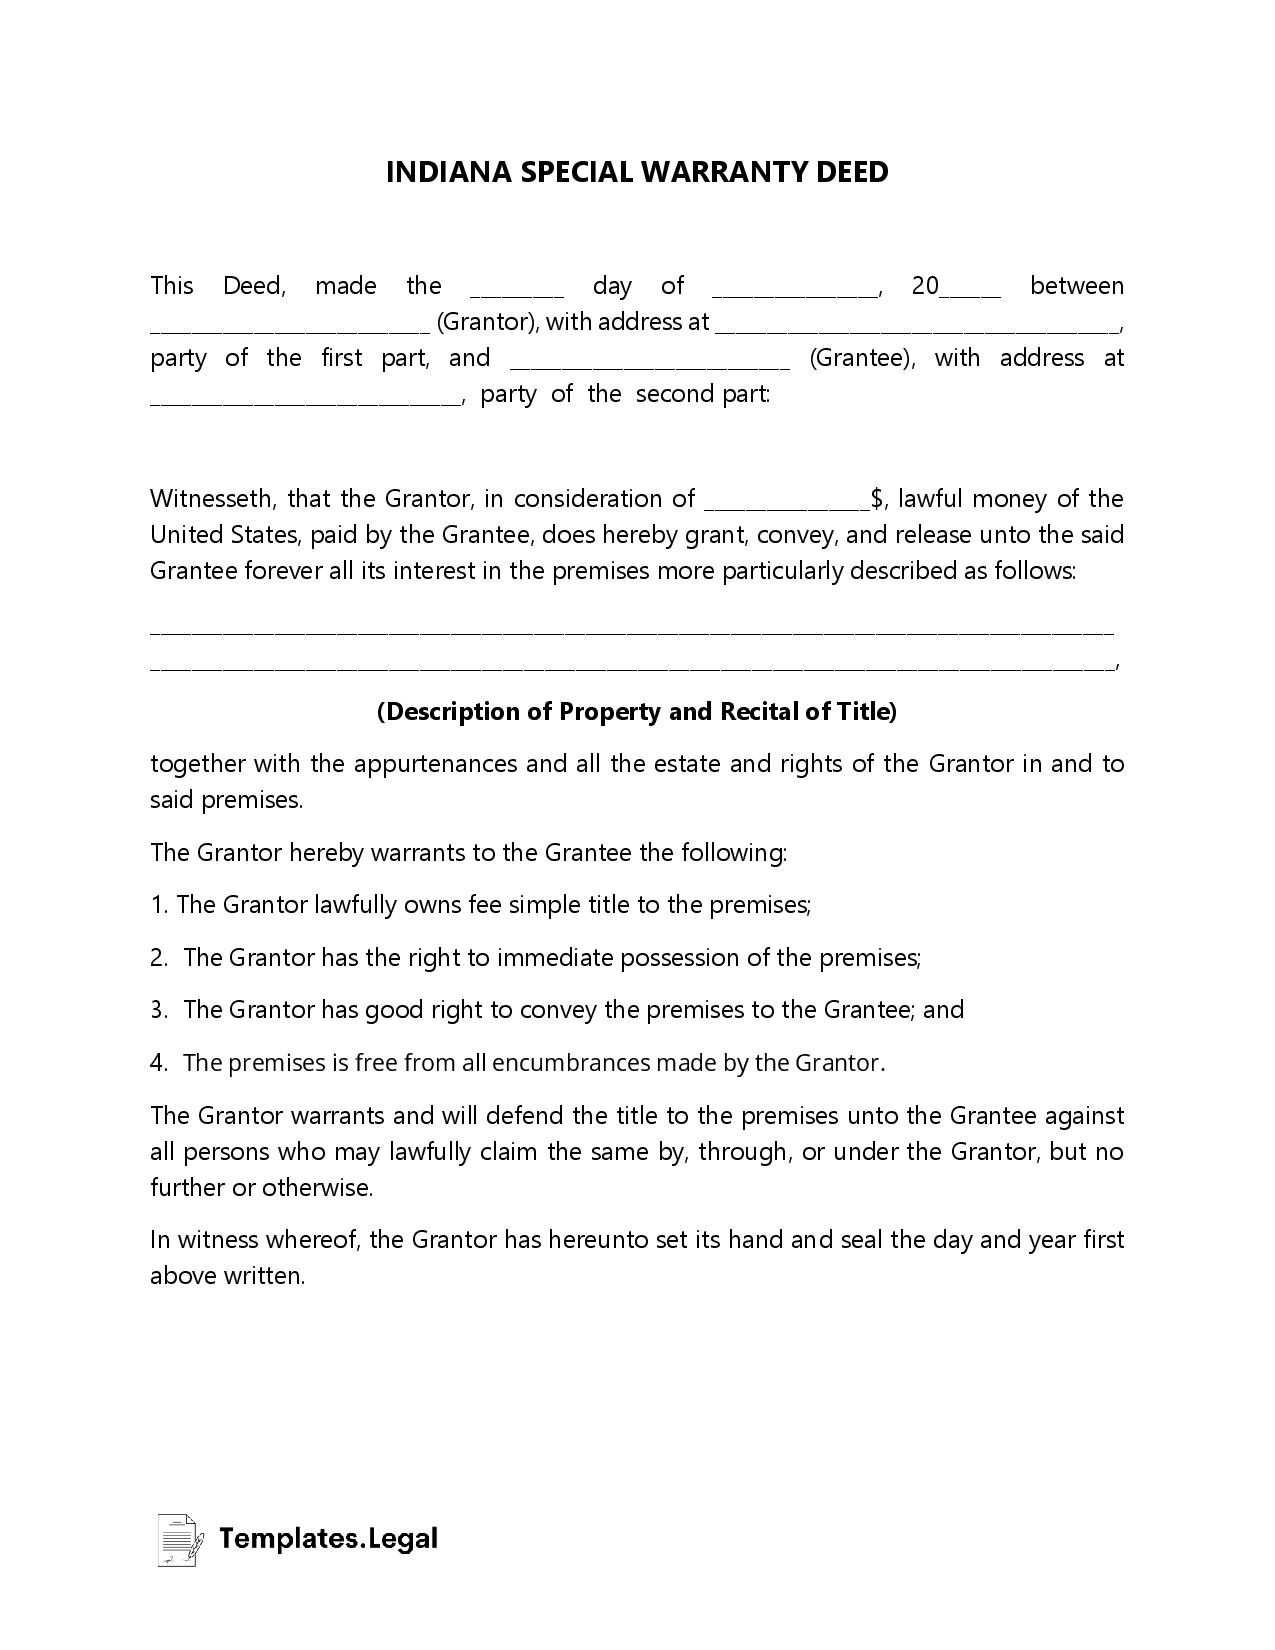 Indiana Special Warranty Deed - Templates.Legal